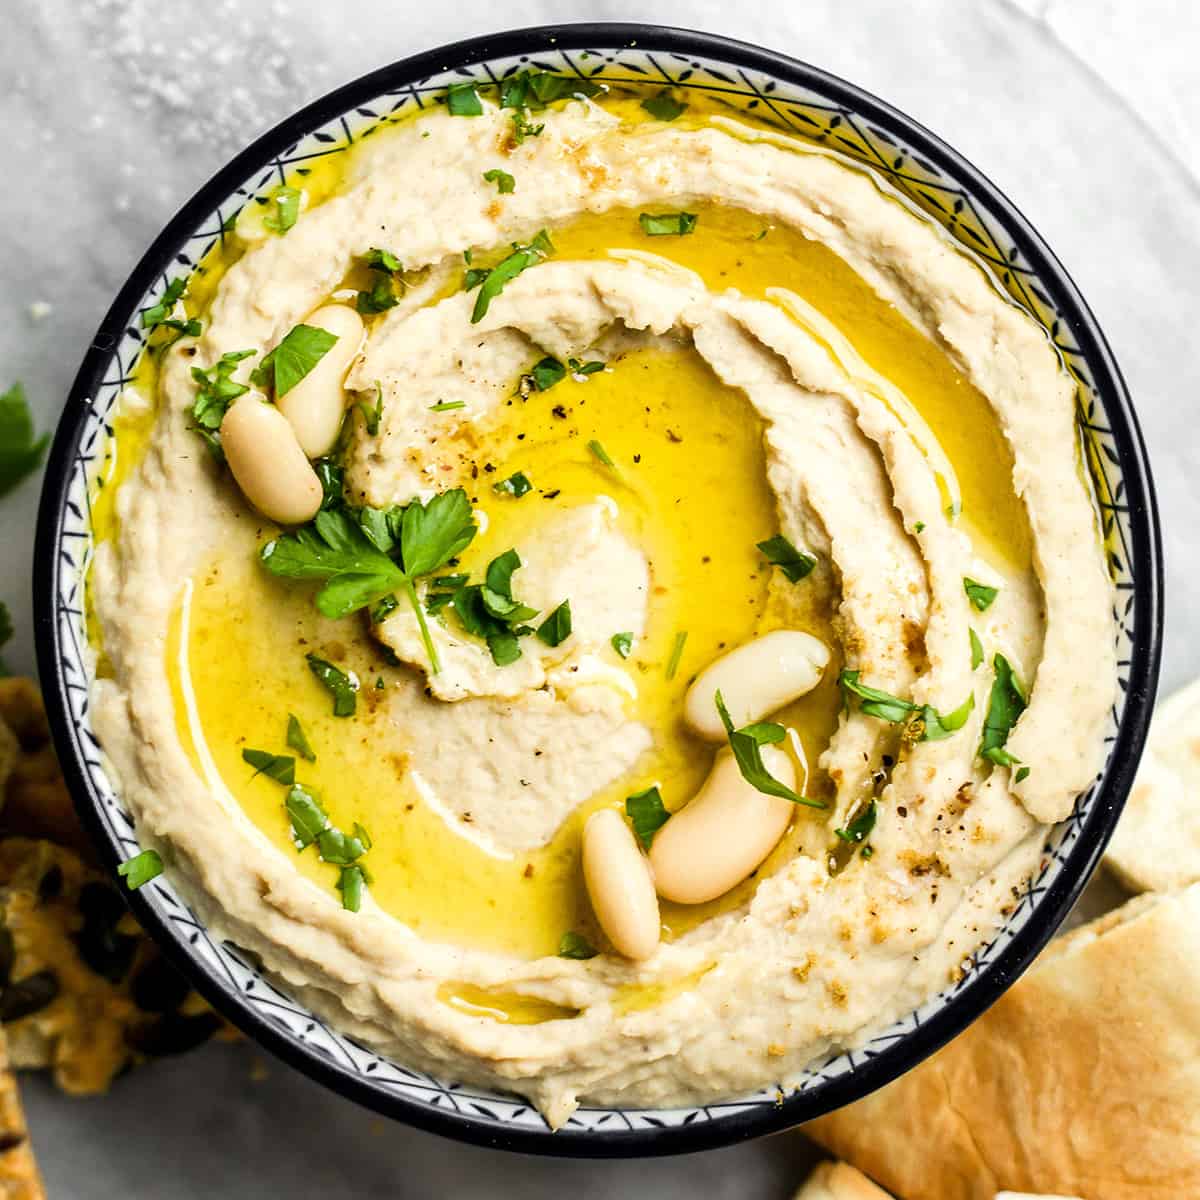 a bowl of White Bean Hummus garnished with parsley and olive oil